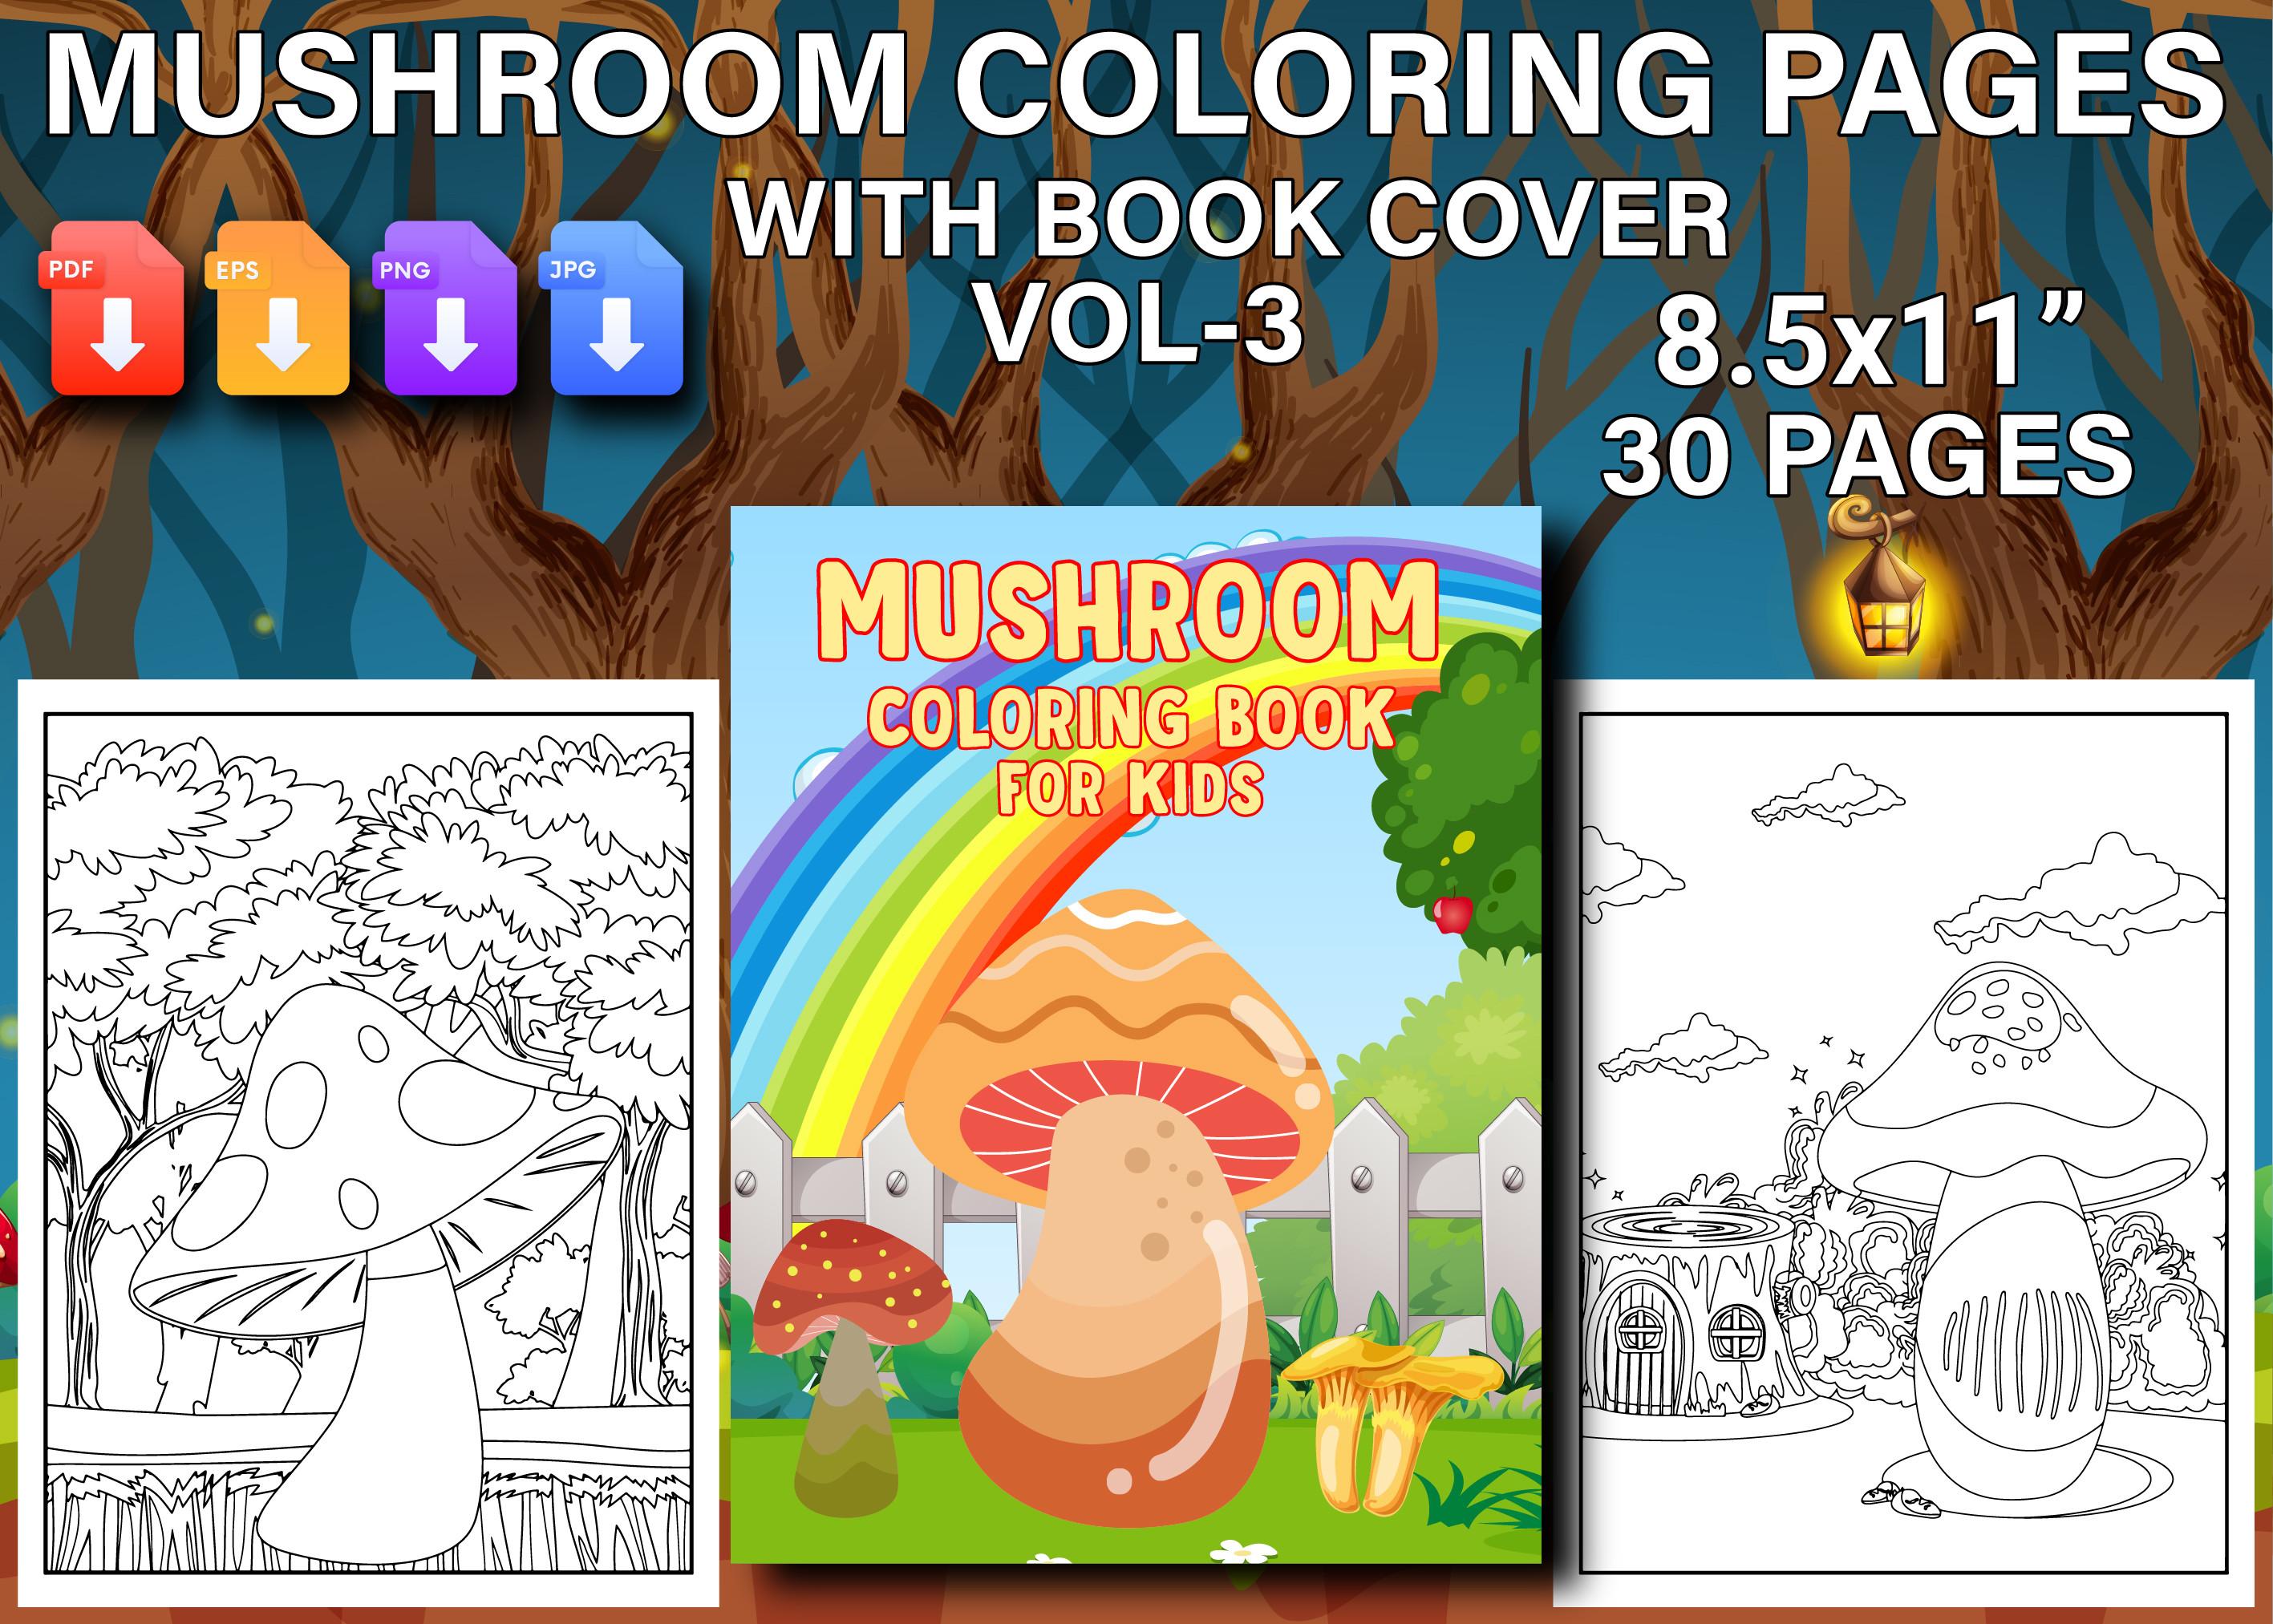 Mushroom Coloring Pages with Book Cover